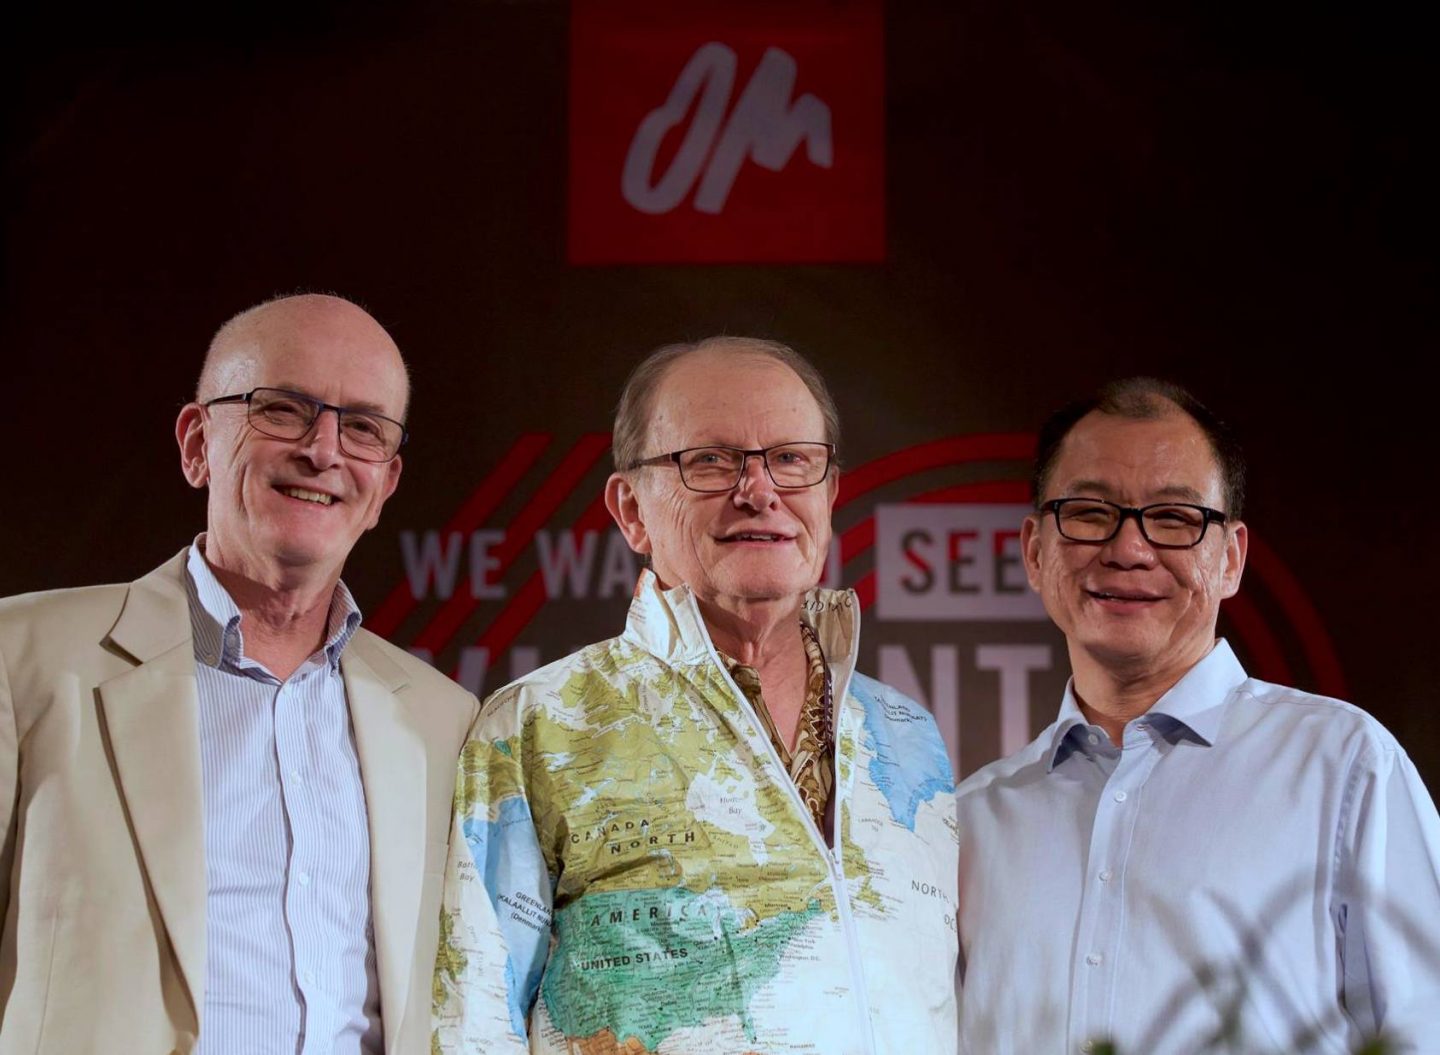 From left: Peter Maiden, George Verwer, founder of OM with his iconic world map jacket, and Lawrence Tong at OM's 60th Anniversary celebrations in 2017.